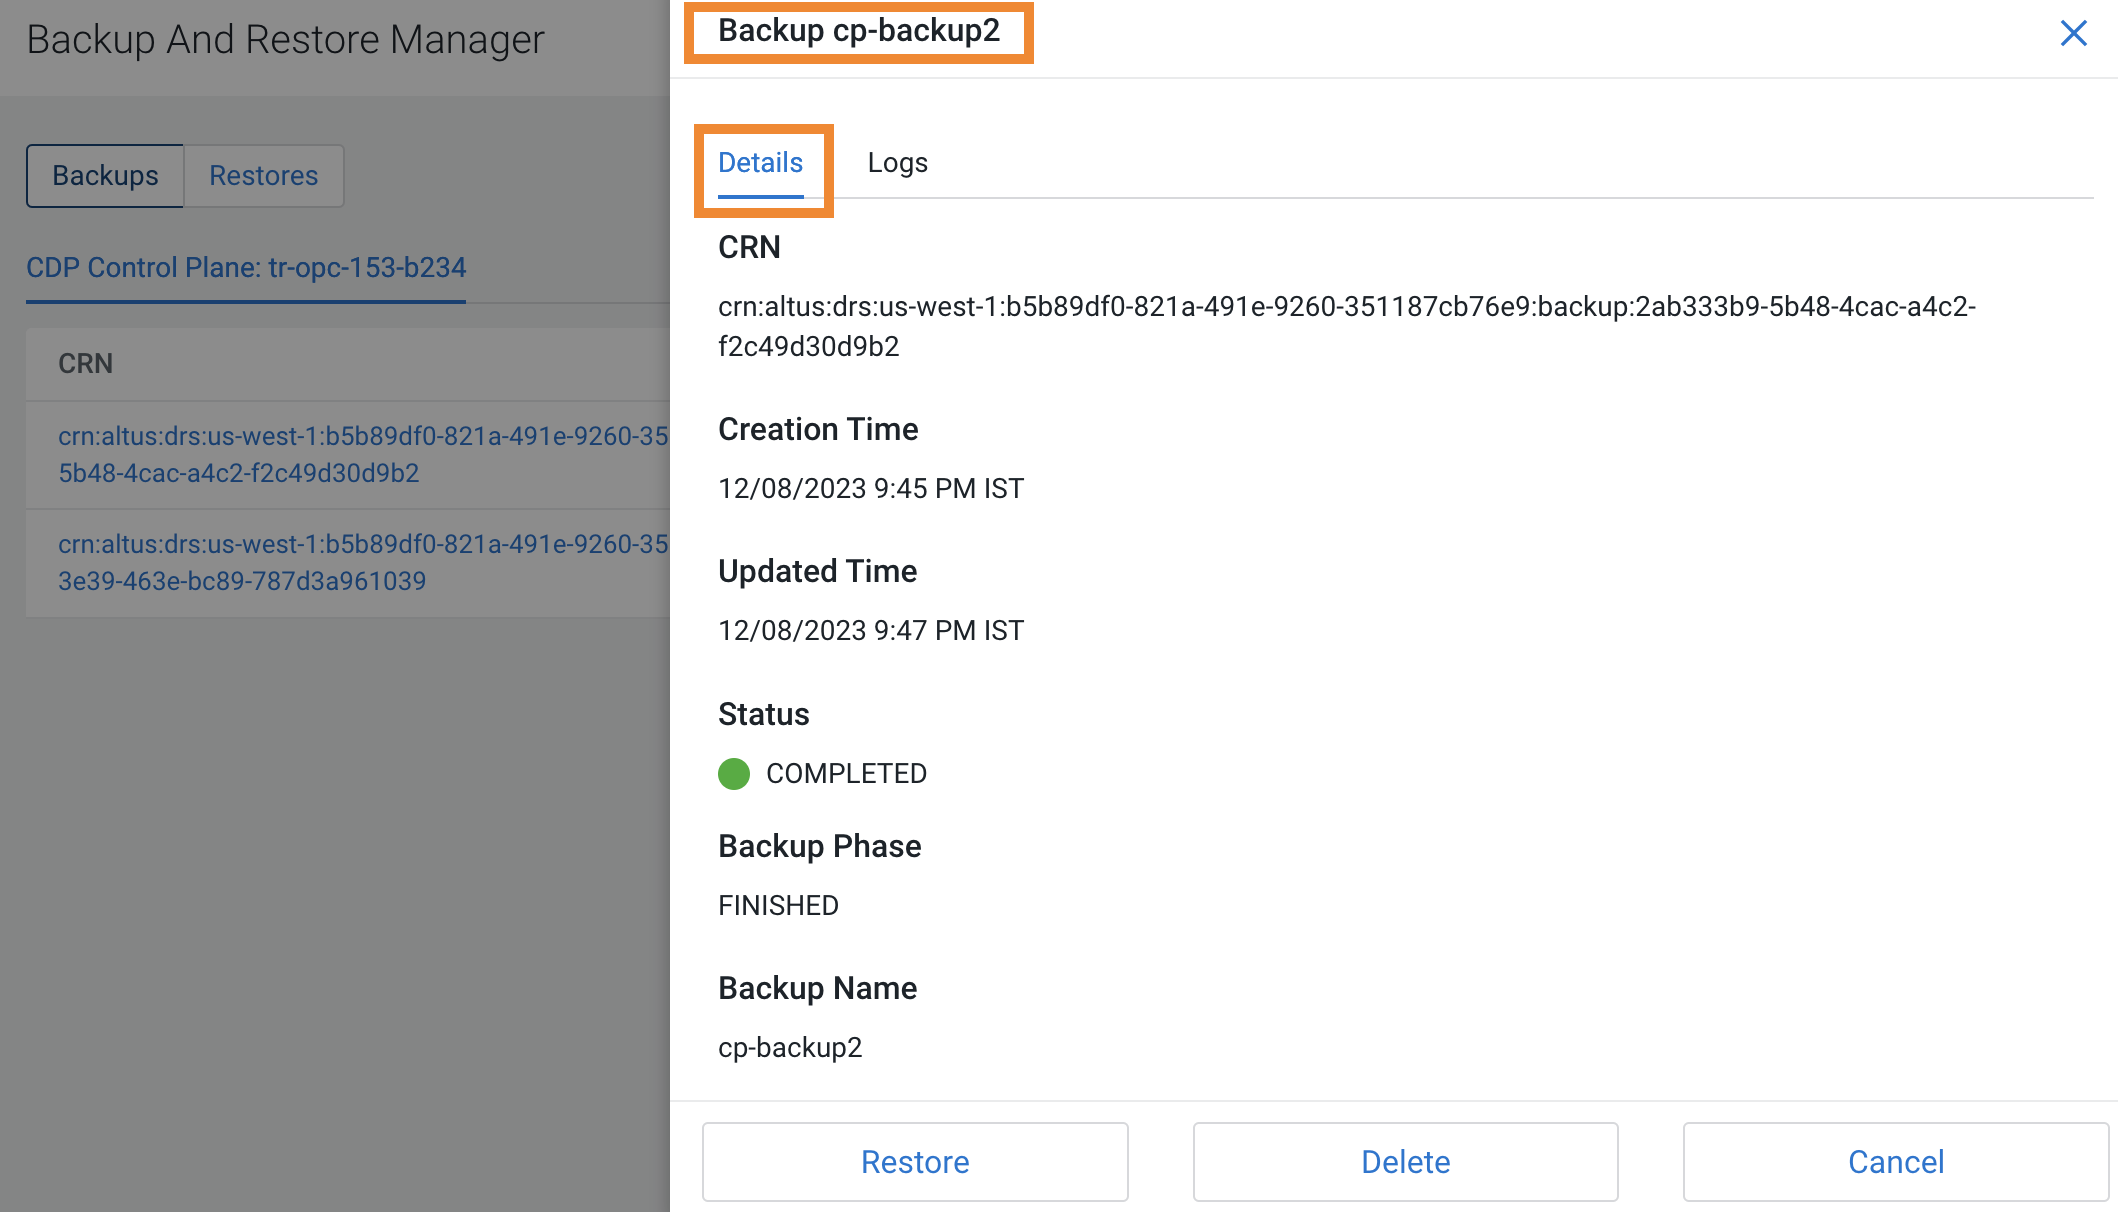 The sample image shows the backup CRN as CRN on the Backups tab in Backup and Restore Manager.